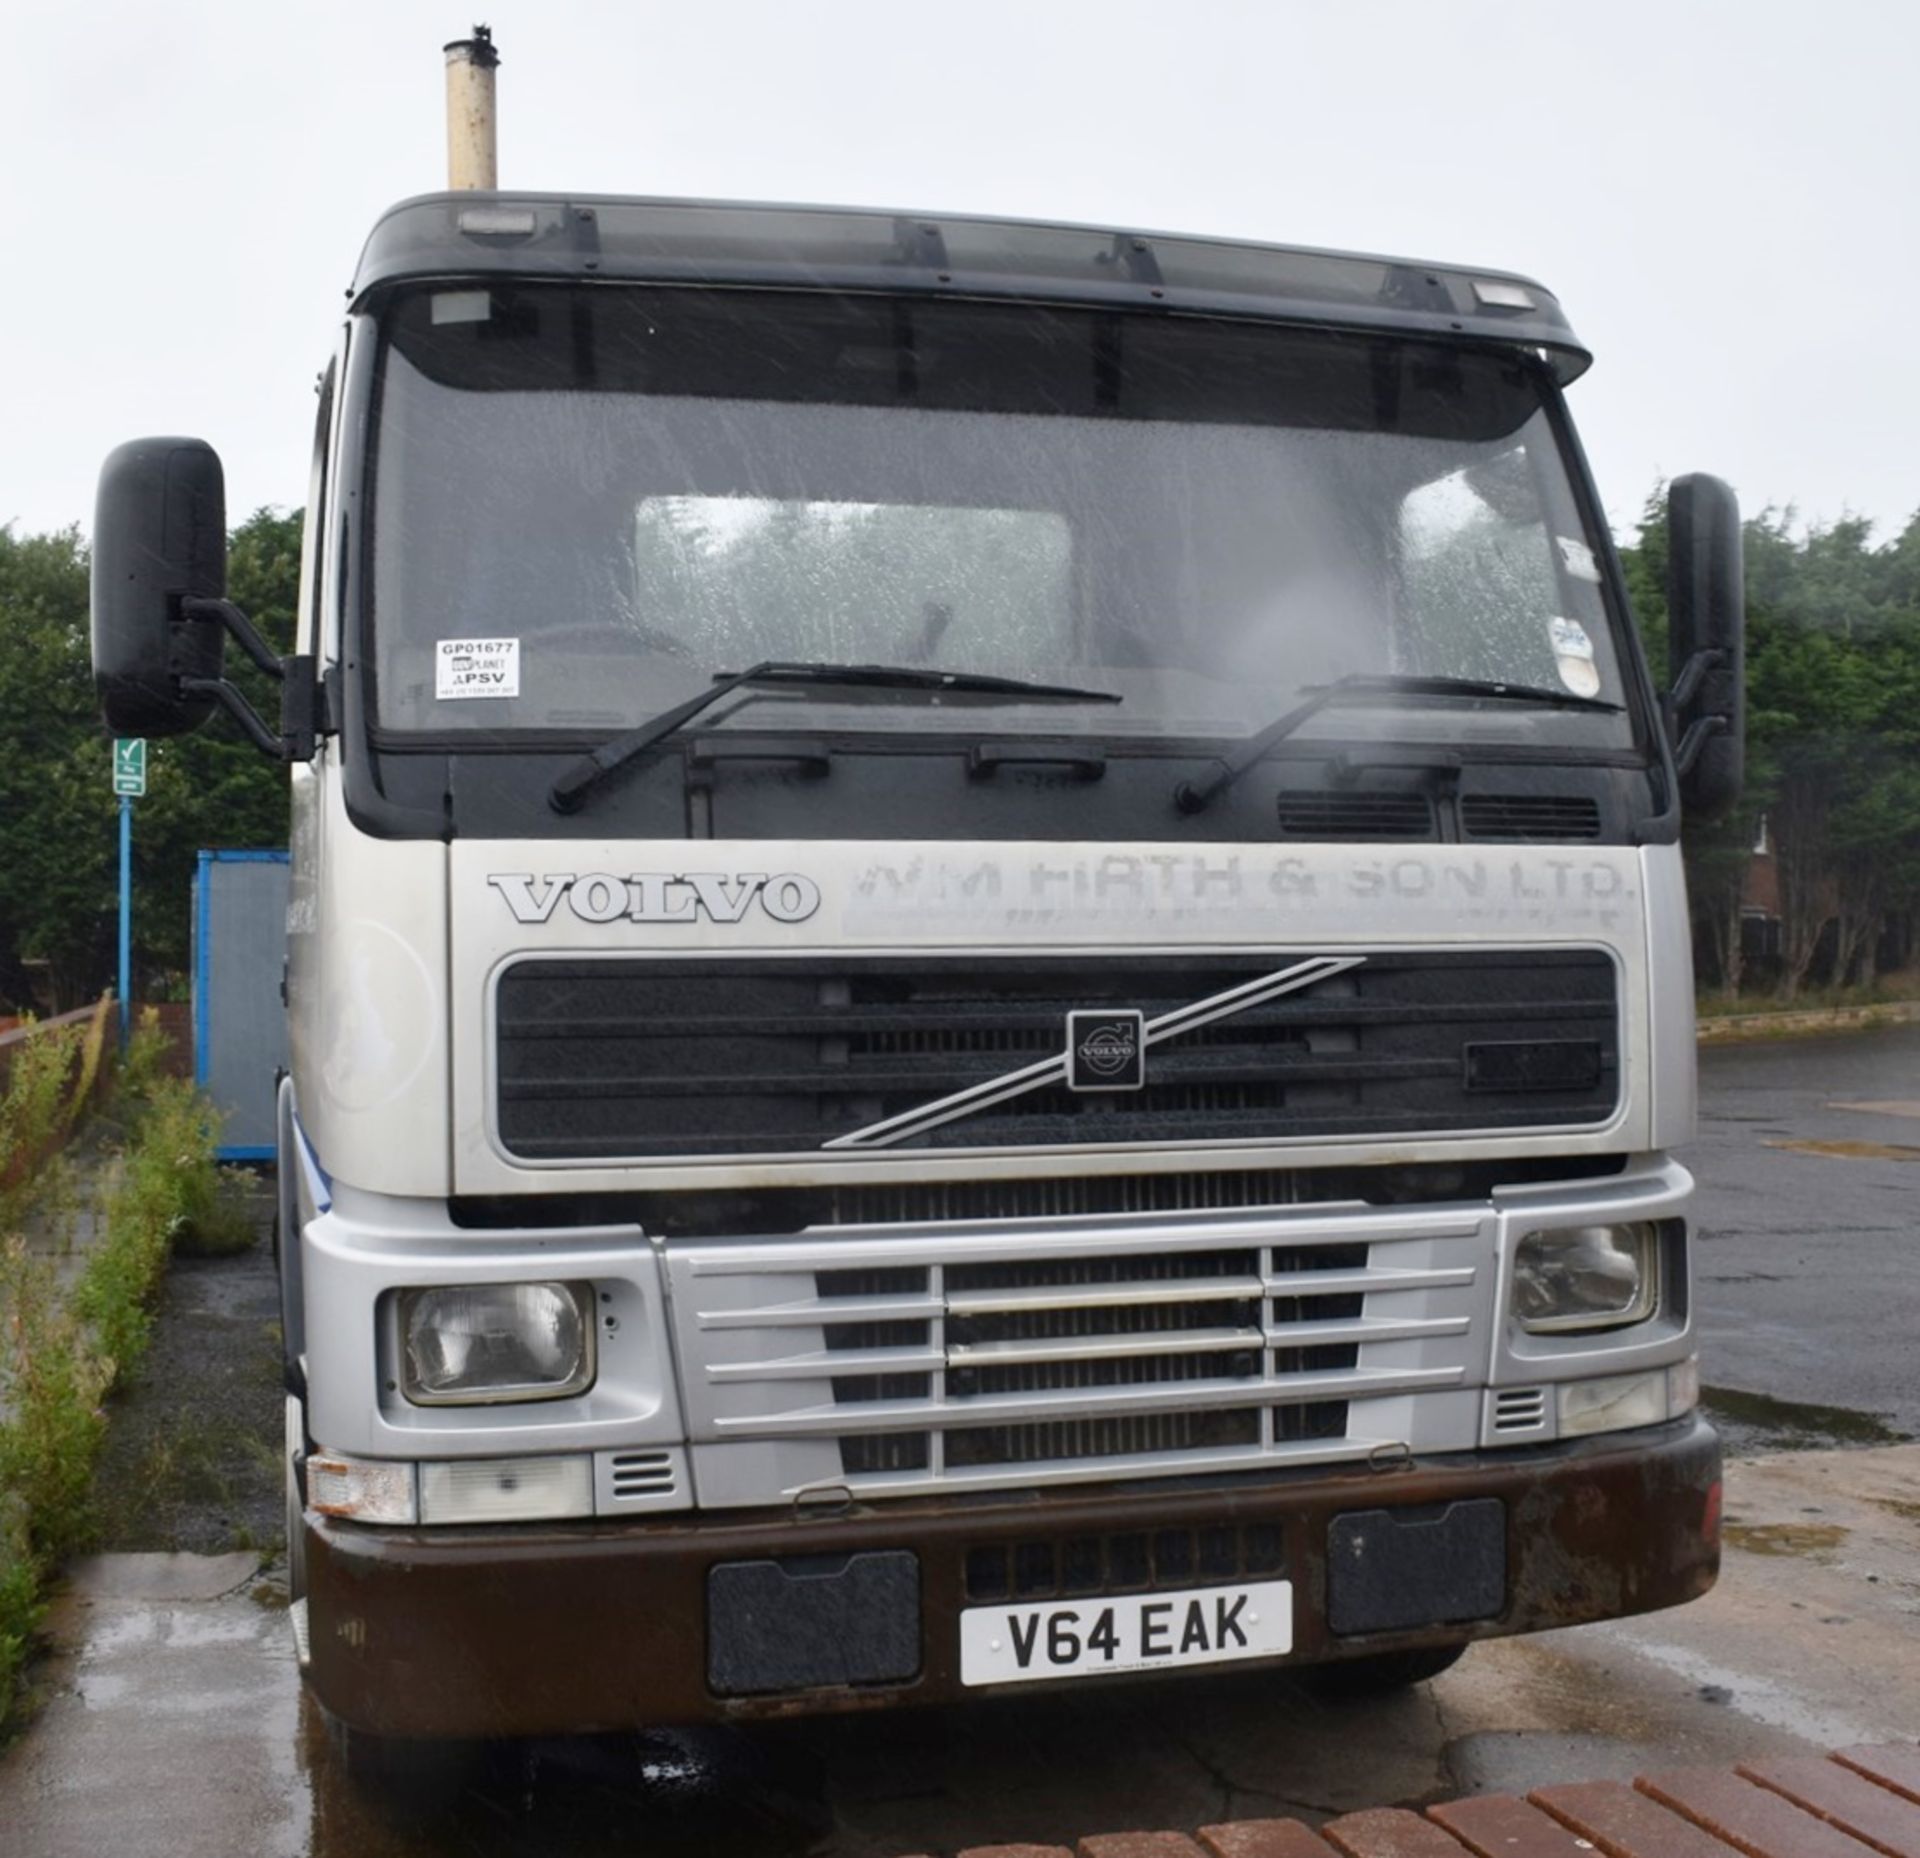 1 x Volvo 340 Plant Lorry With Tipper Chasis and Fitted Winch - CL547 - Location: South Yorkshire. - Image 8 of 25